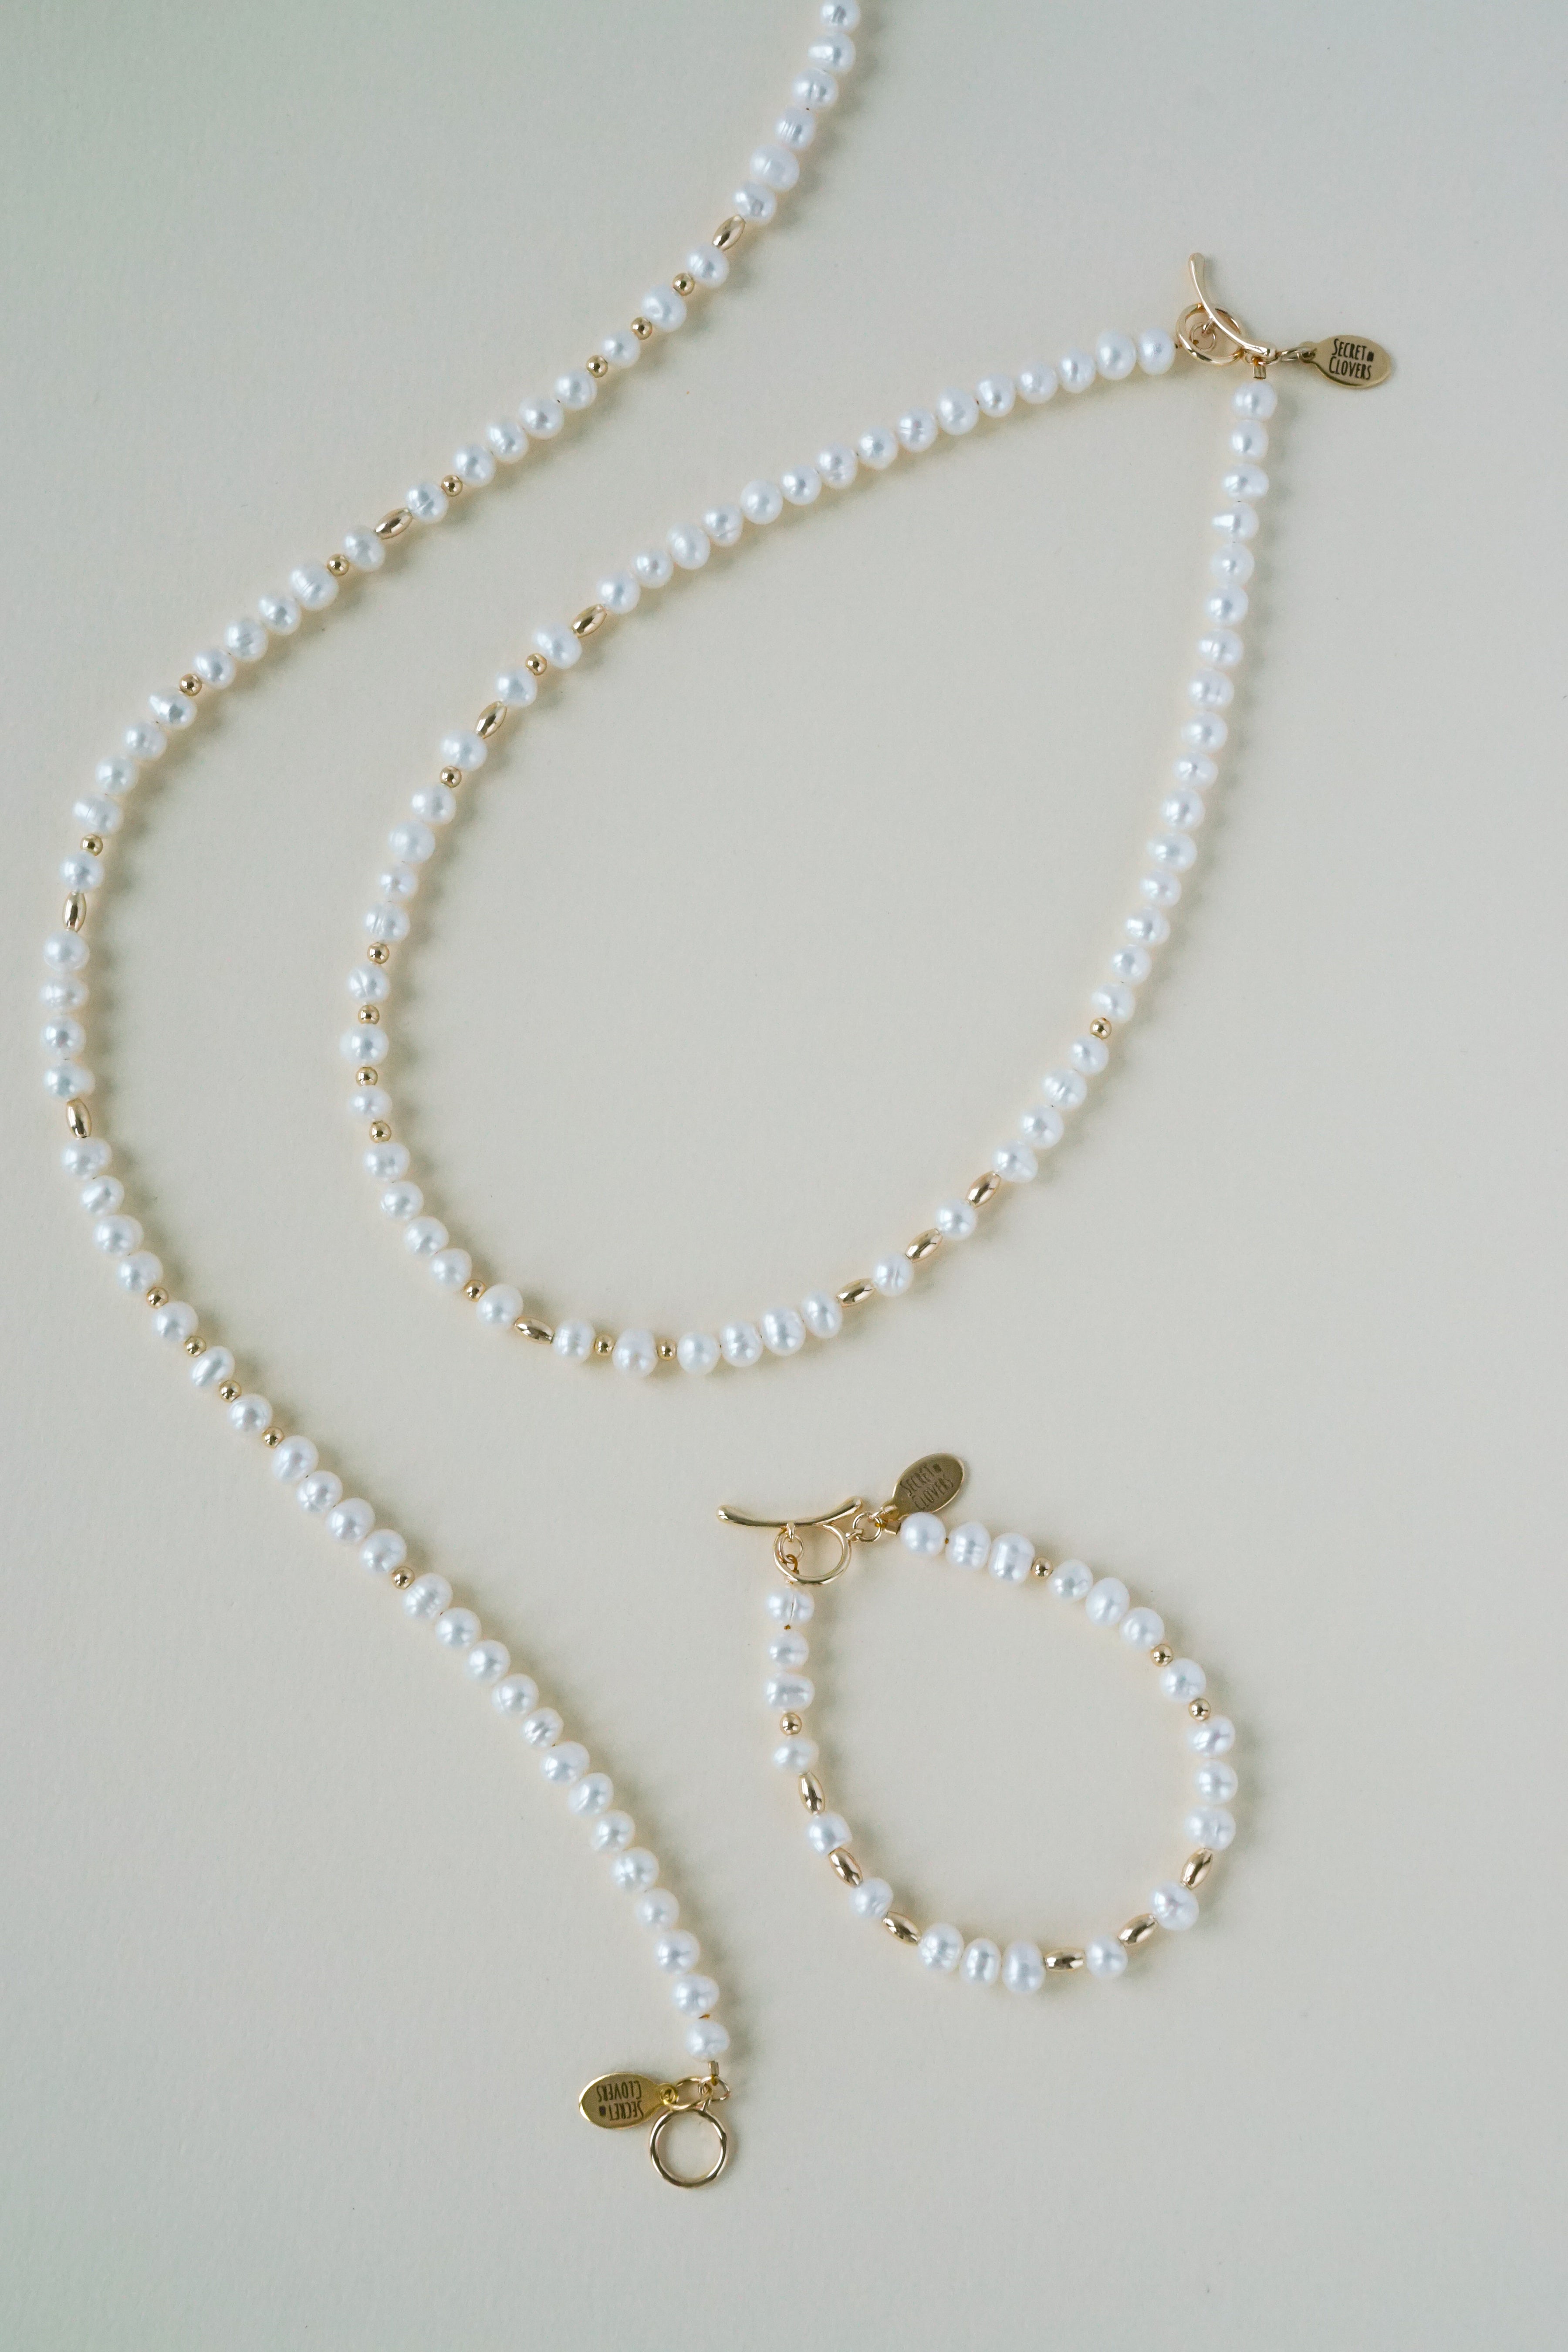 The Morse Code Pearl Necklace - Personalised (Backorder)